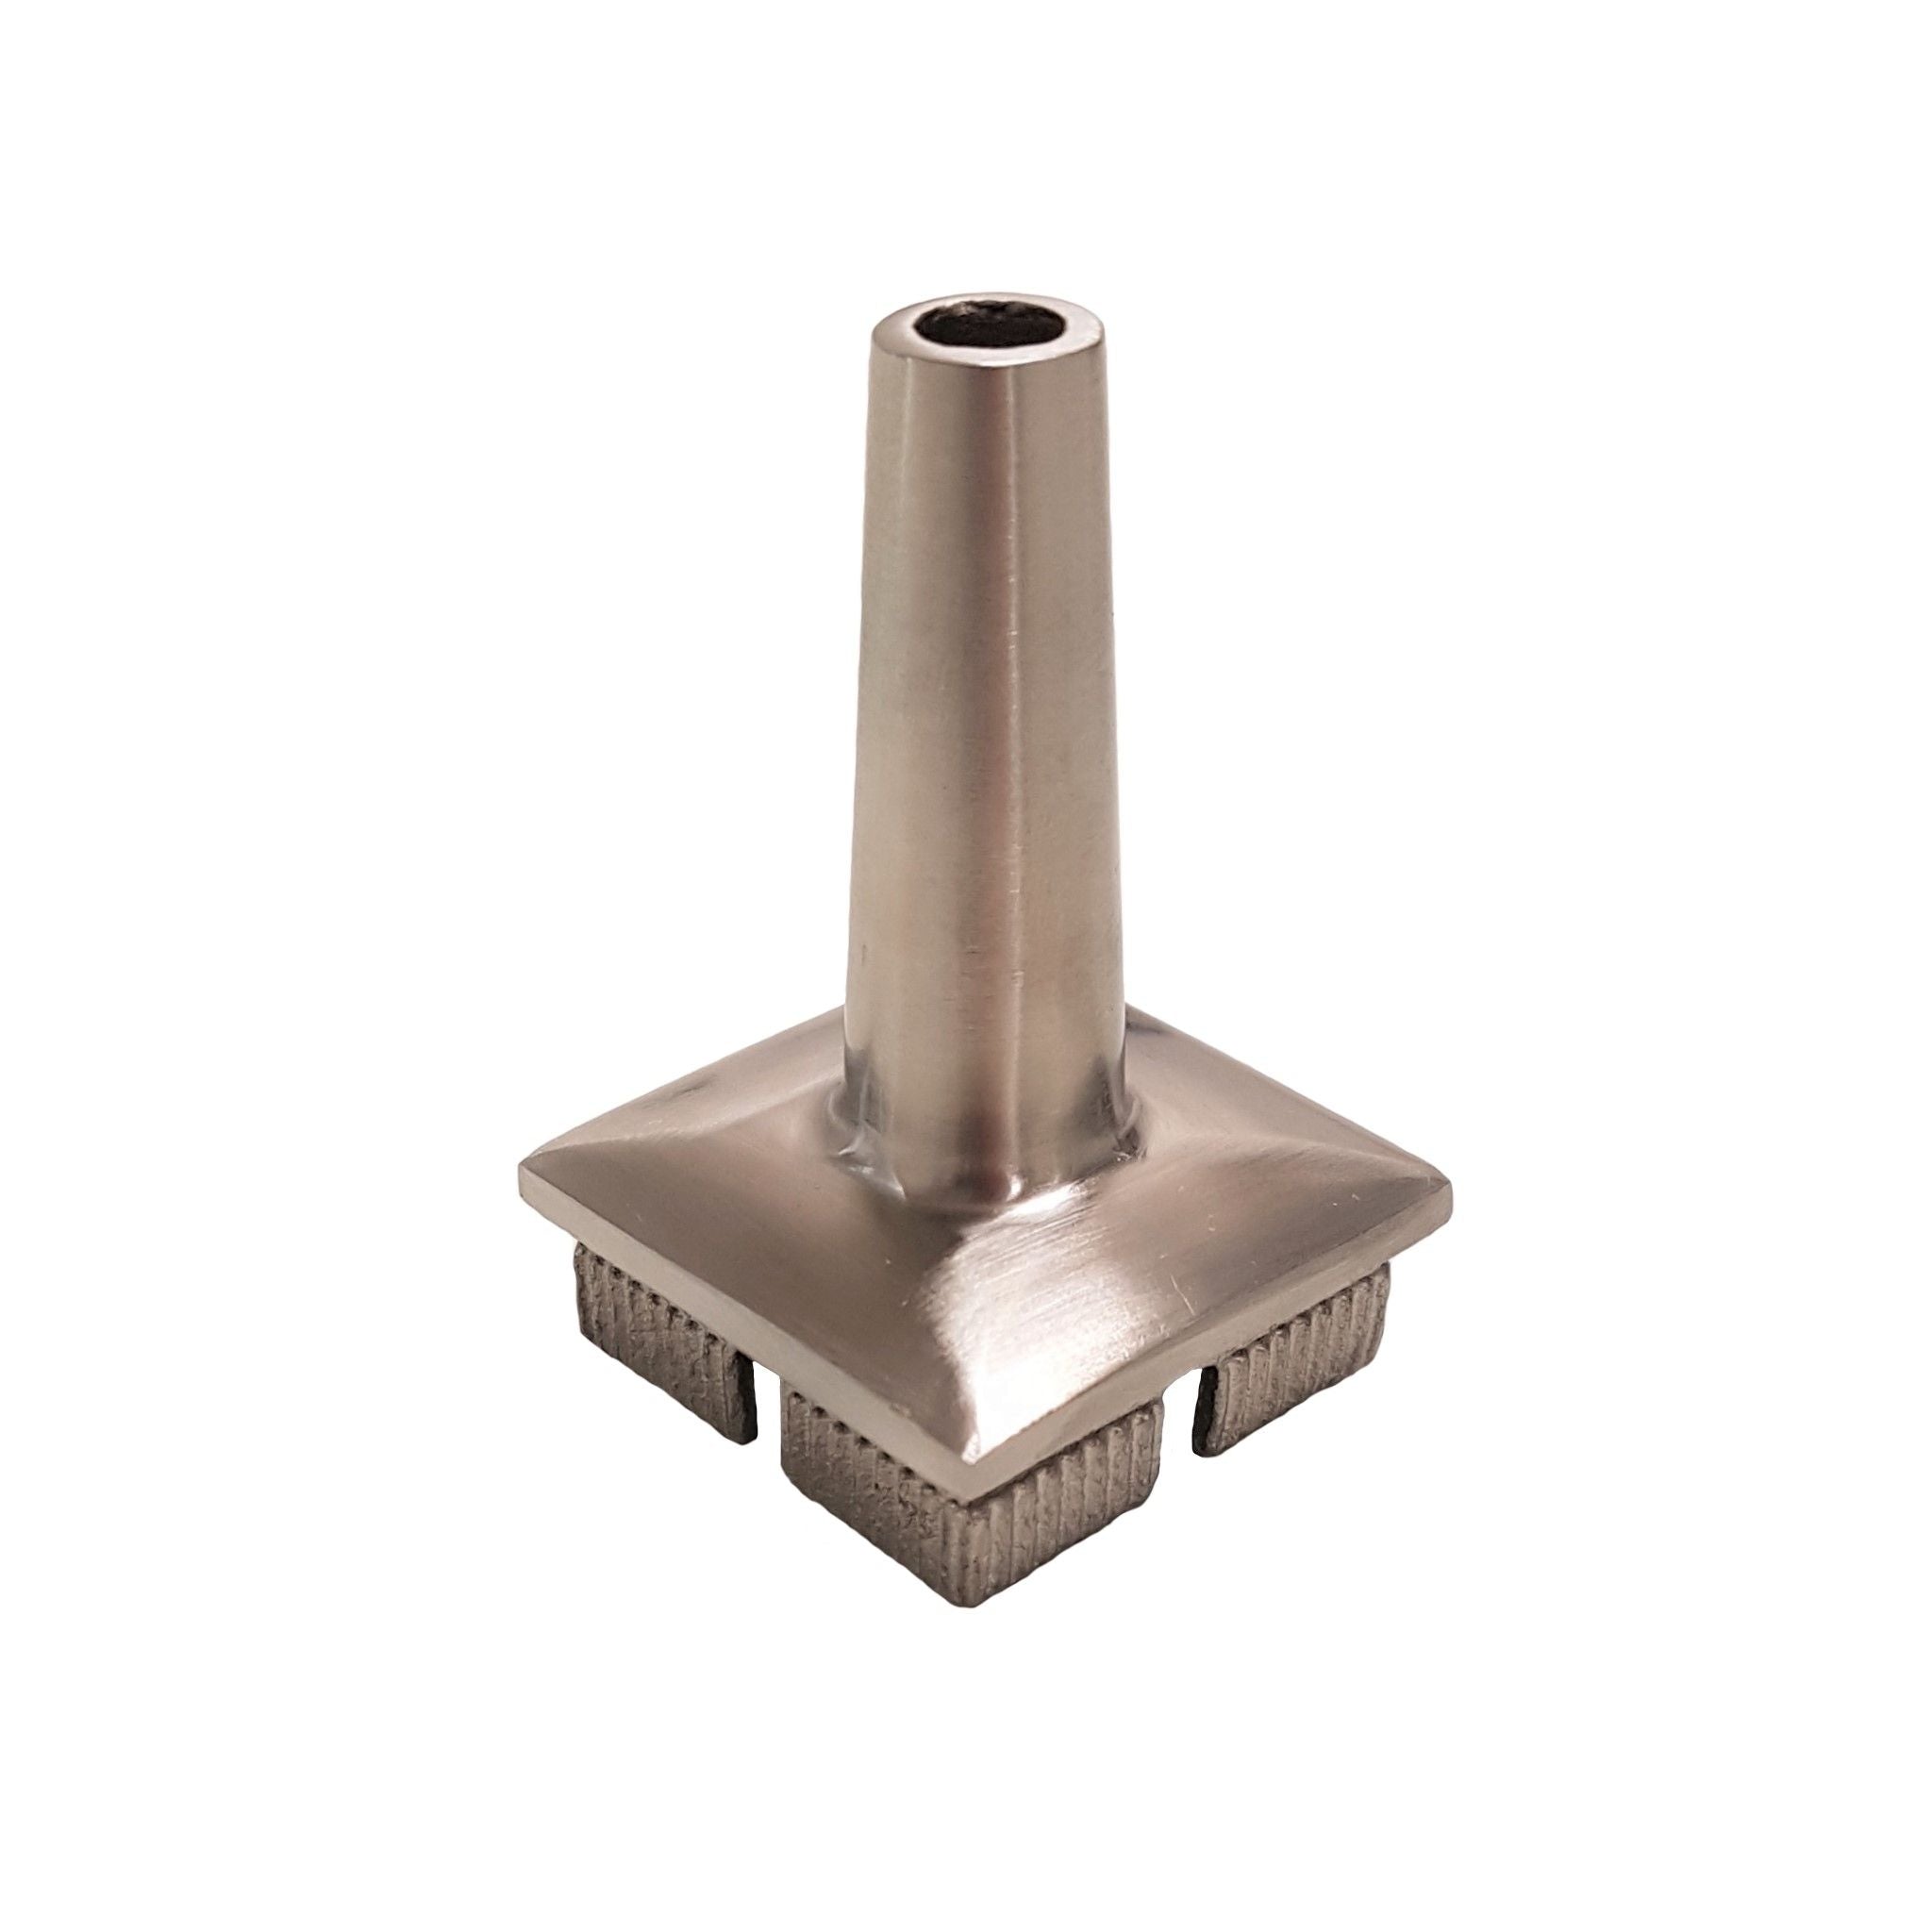 38mm Square - Rail Converter - Stainless Steel Products